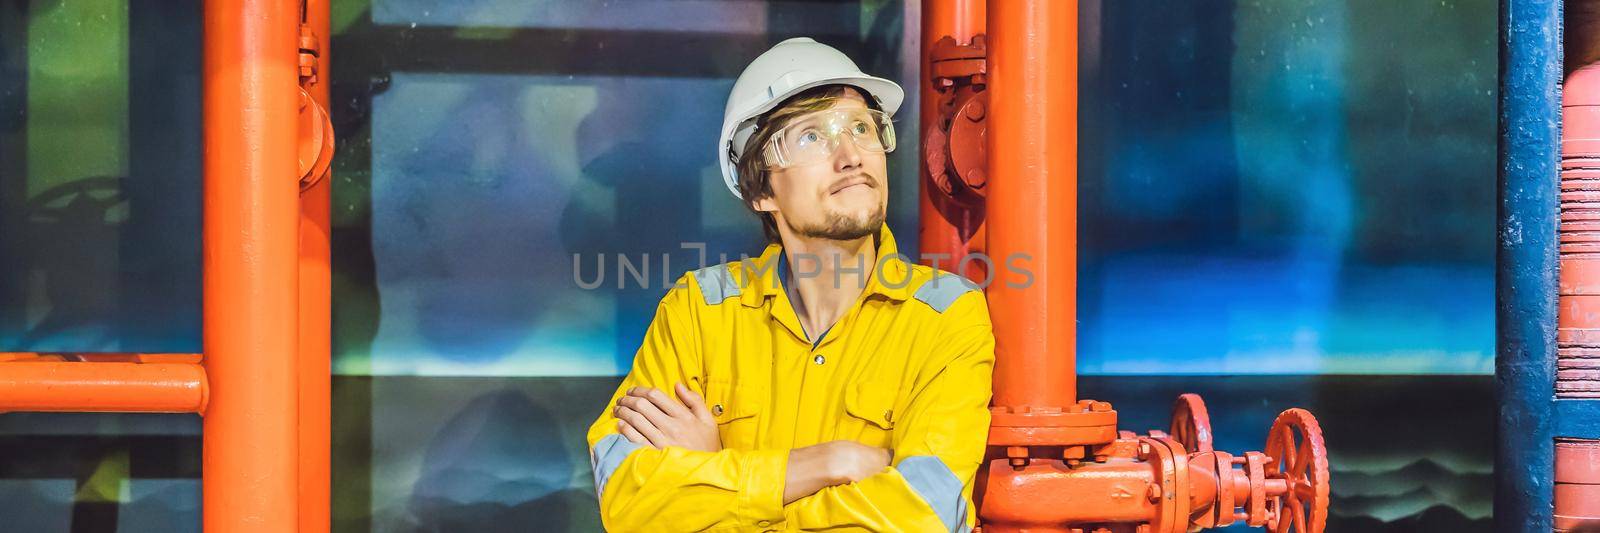 Young man in a yellow work uniform, glasses and helmet in industrial environment,oil Platform or liquefied gas plant BANNER, LONG FORMAT by galitskaya